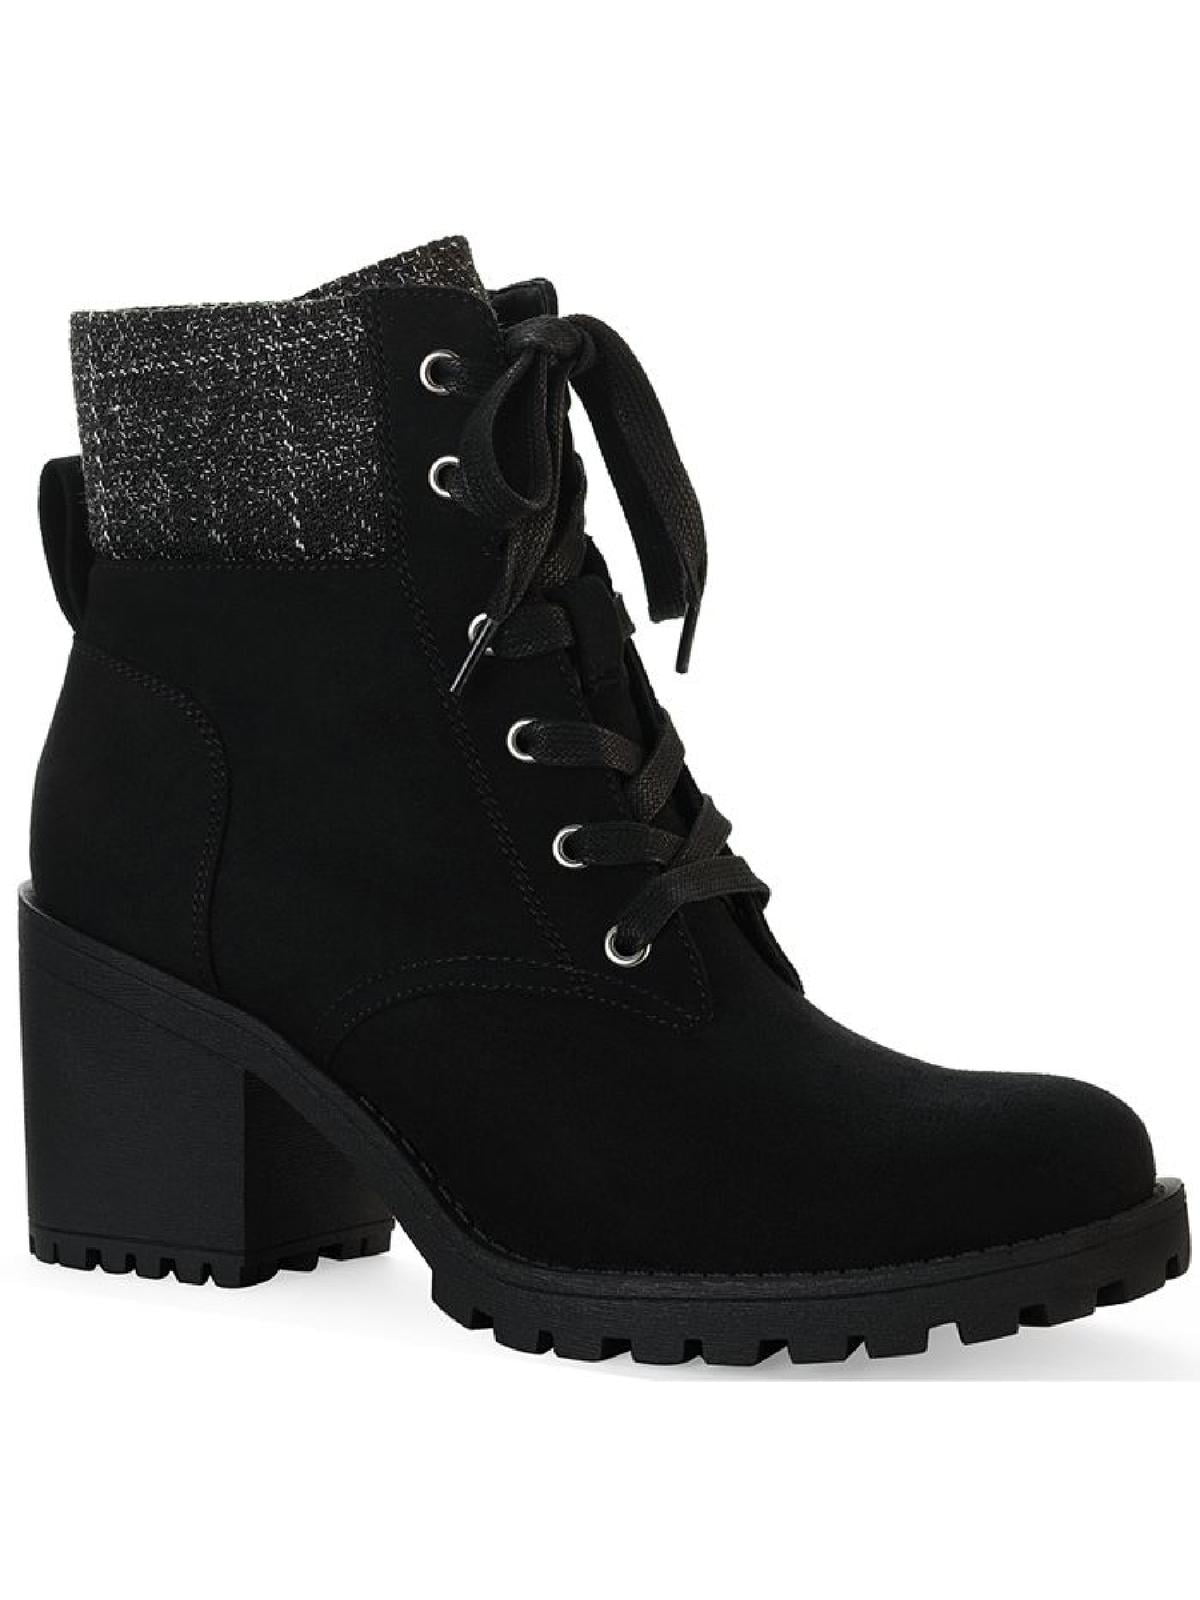 Sun + Stone Womens Romina Zipper Ankle Combat & Lace-up Boots